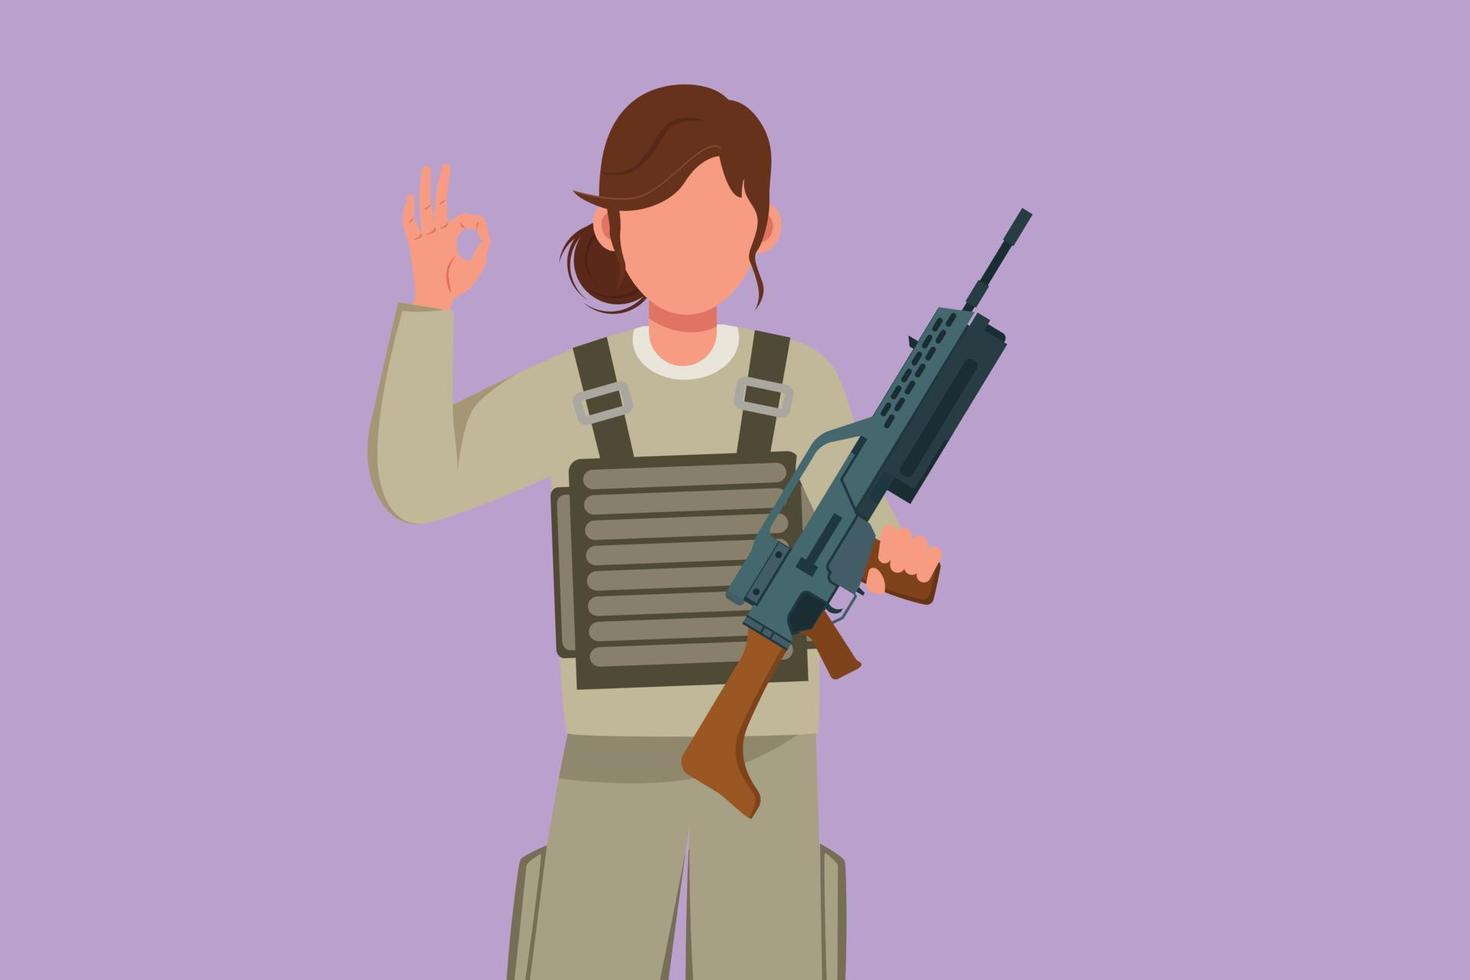 Cartoon flat style drawing female soldier in full uniform, holding weapon with okay gesture and ready to defend country on battlefield against enemy. Army on duty. Graphic design vector illustration